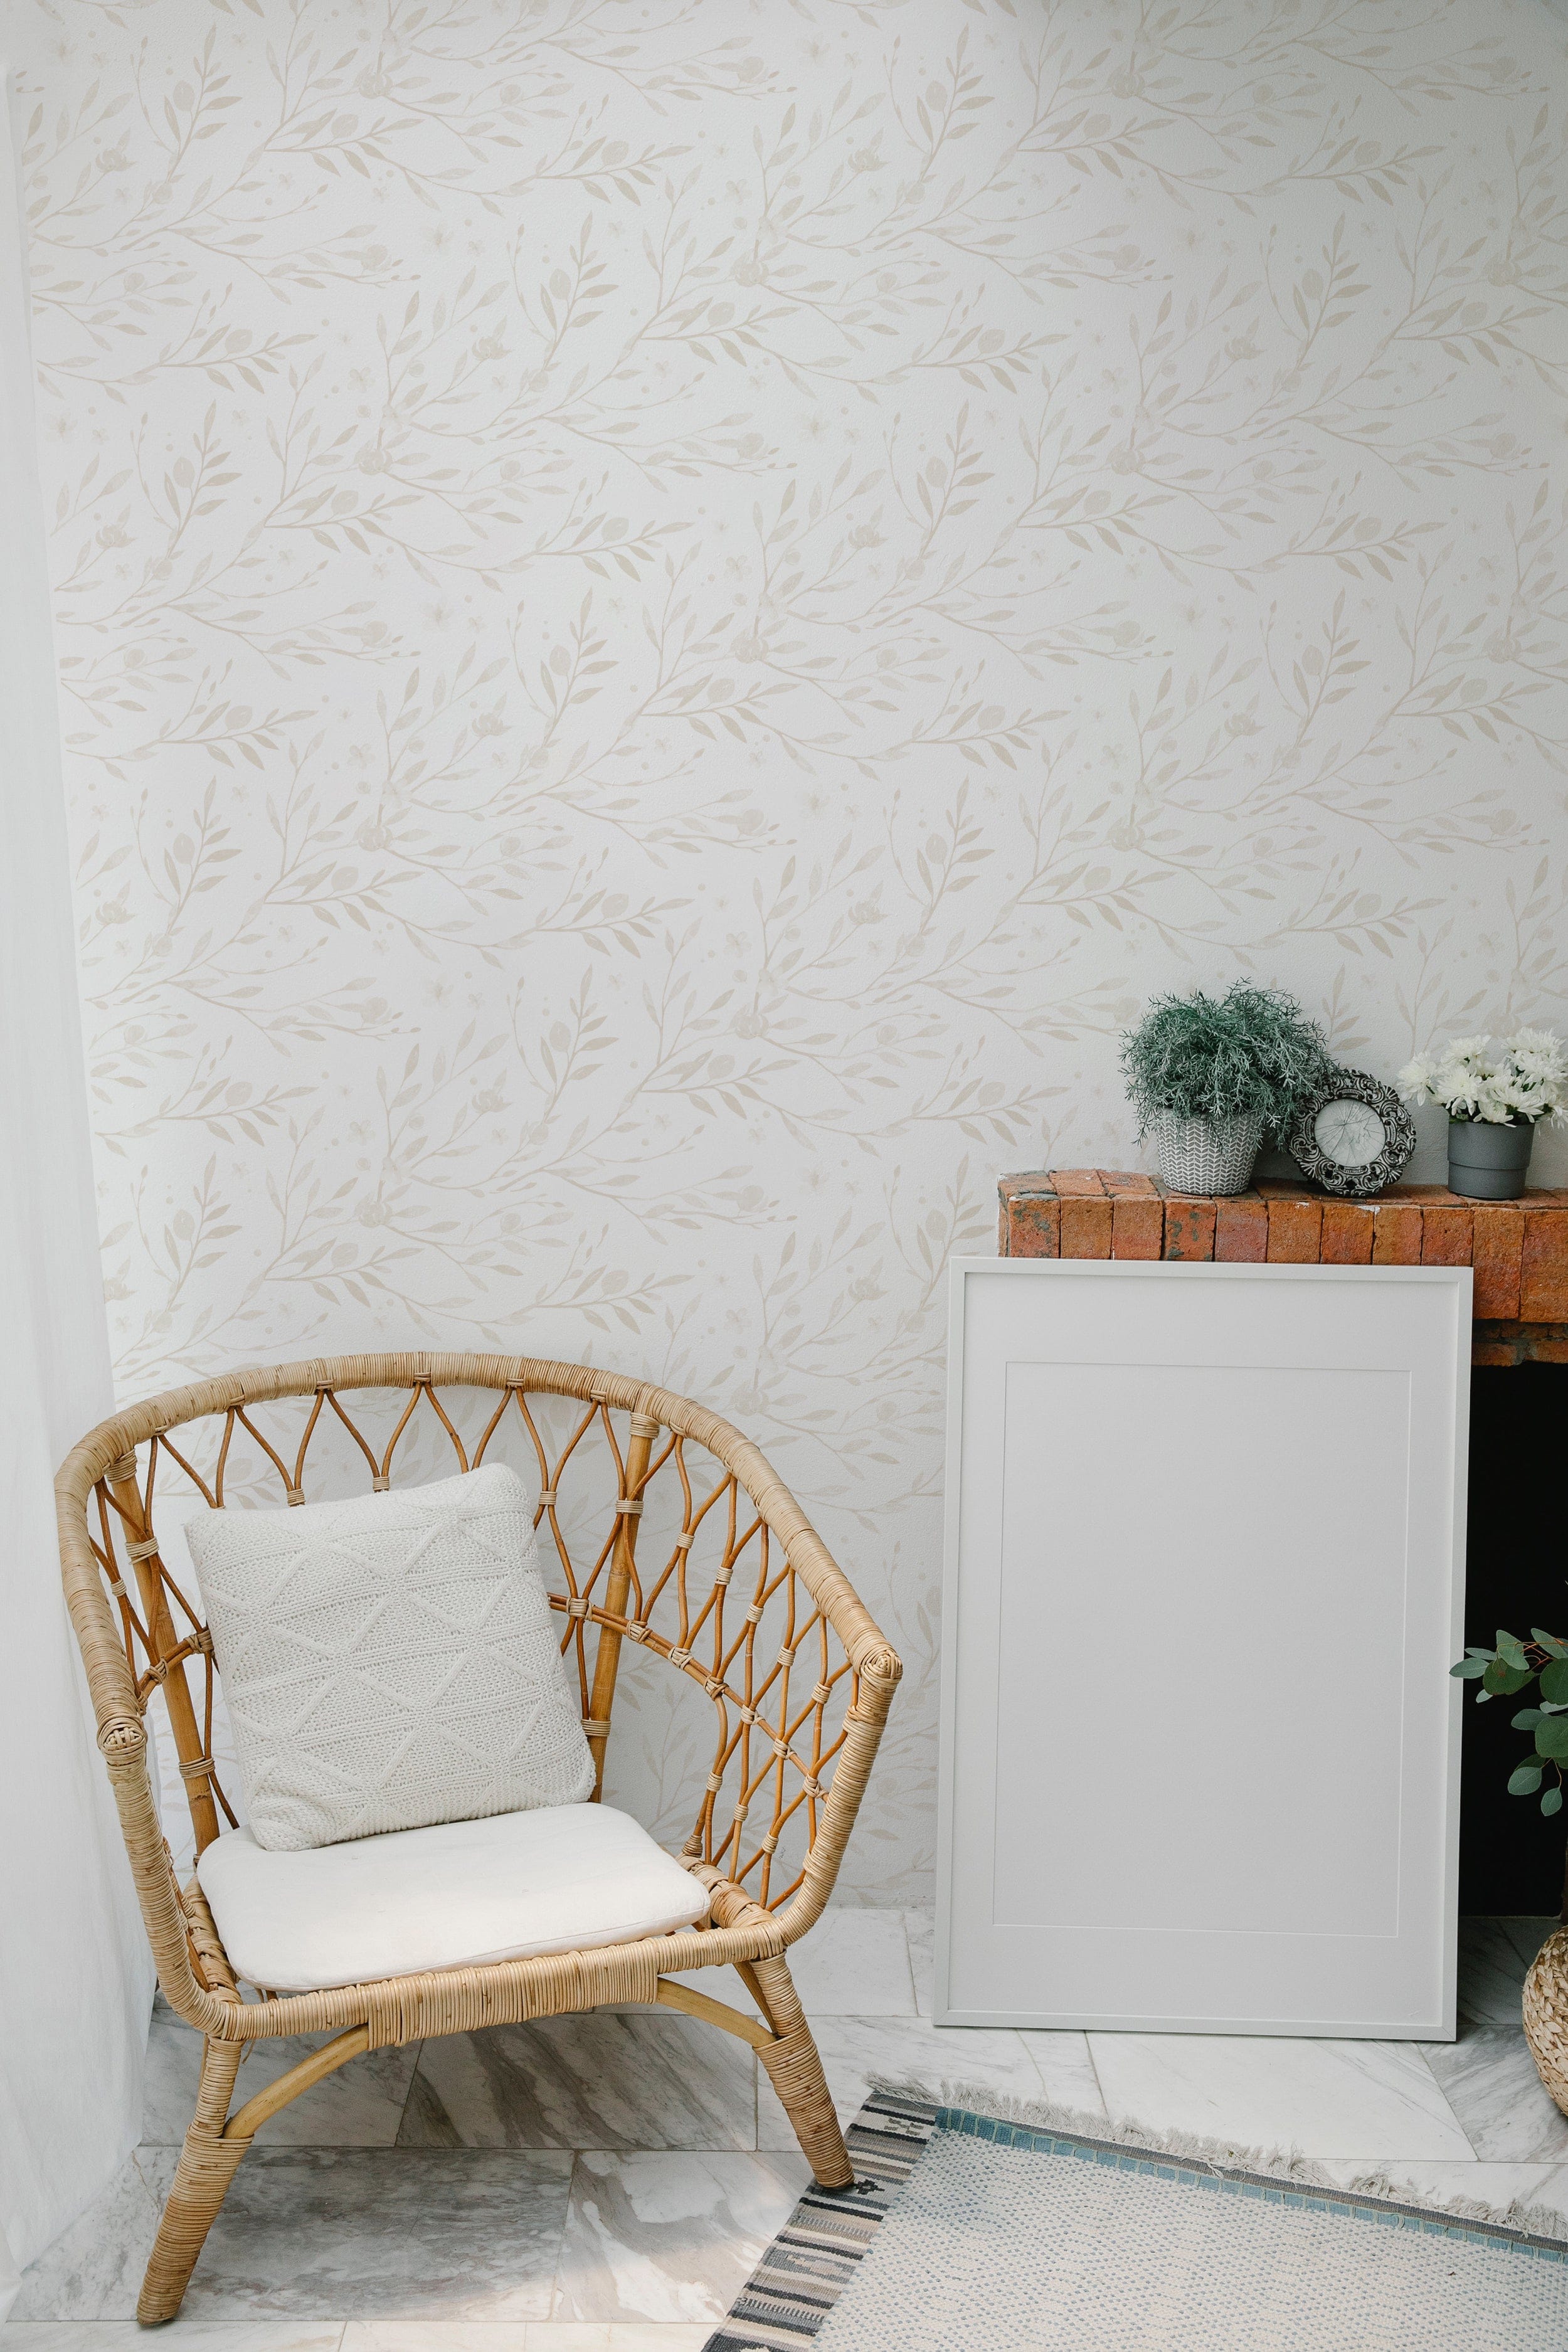 A cozy room corner featuring the Watercolour Spring Bird Wallpaper in Ecru with a natural wicker chair, creating a serene and inviting space with its delicate branch and bird design.